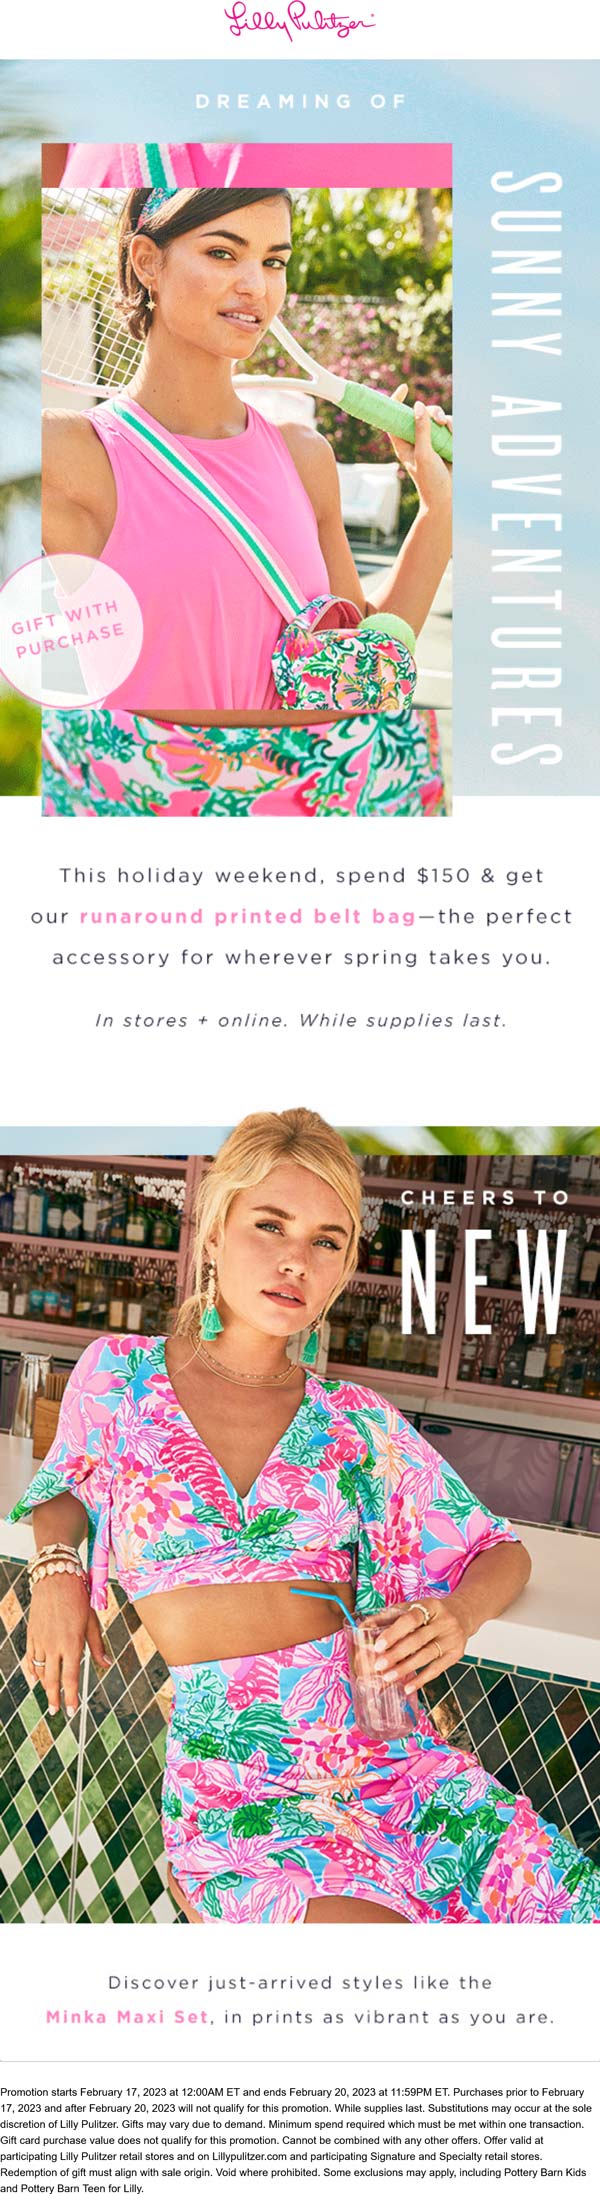 Lilly Pulitzer stores Coupon  Free belt bag on $150 at Lilly Pulitzer, ditto online #lillypulitzer 